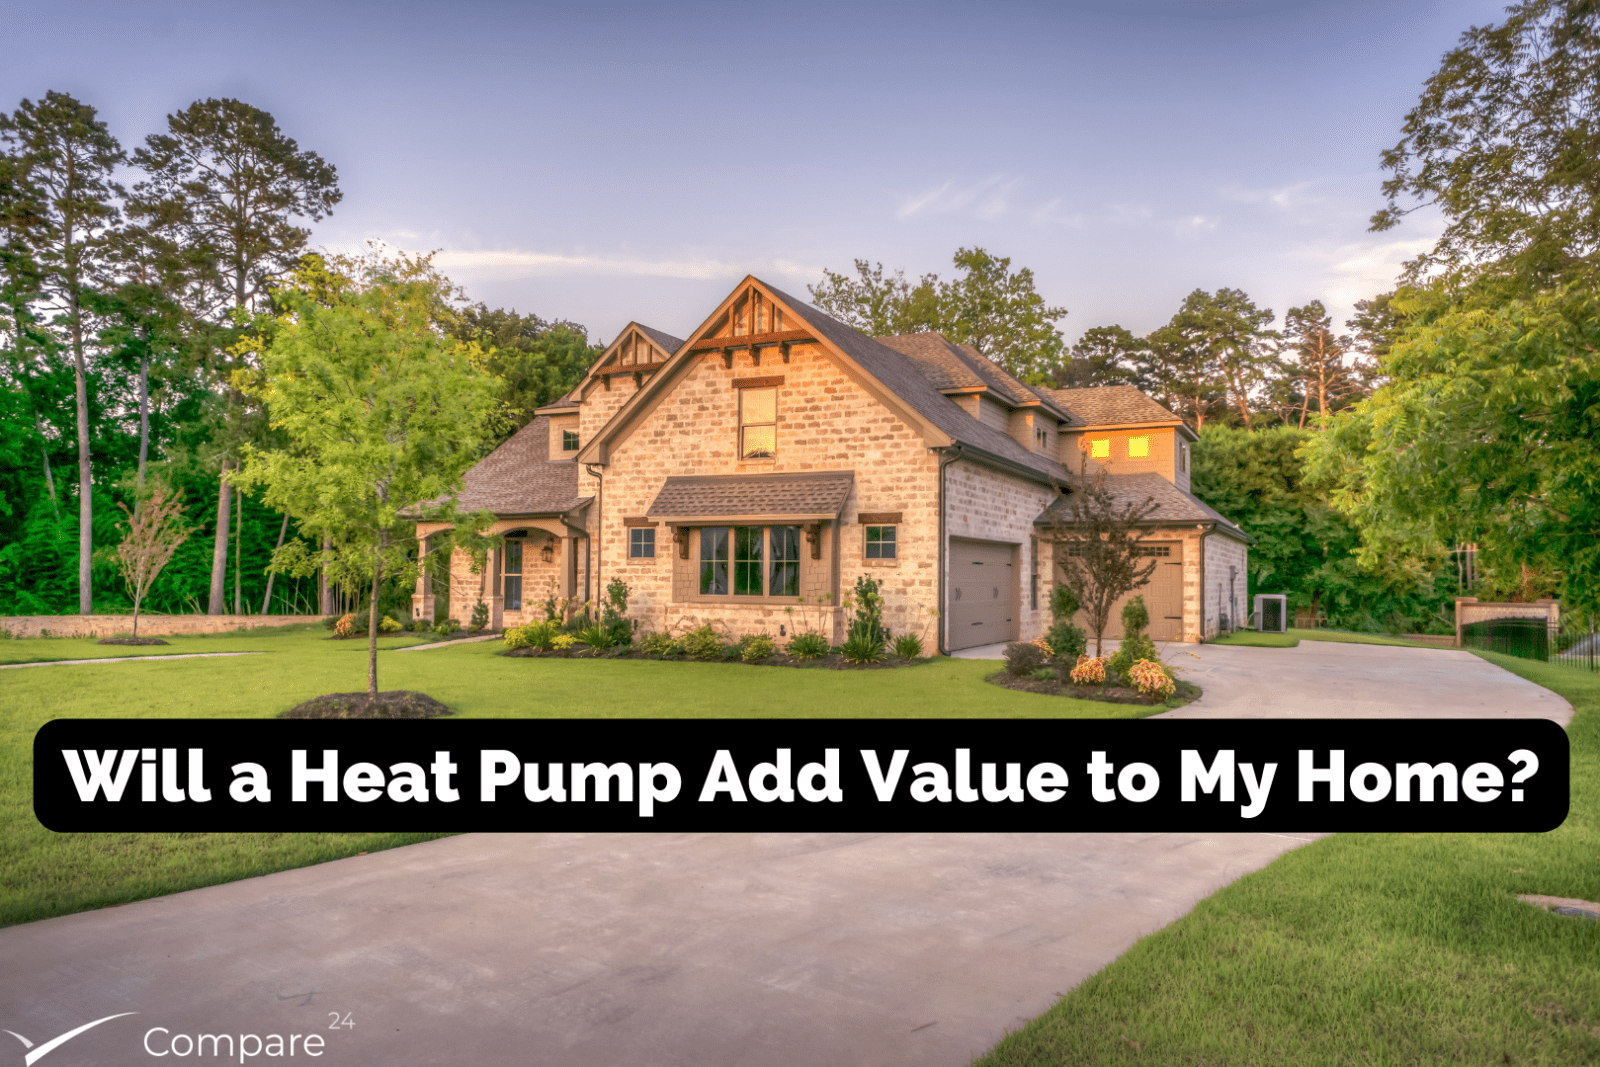 Will a Heat Pump Add Value to My Home